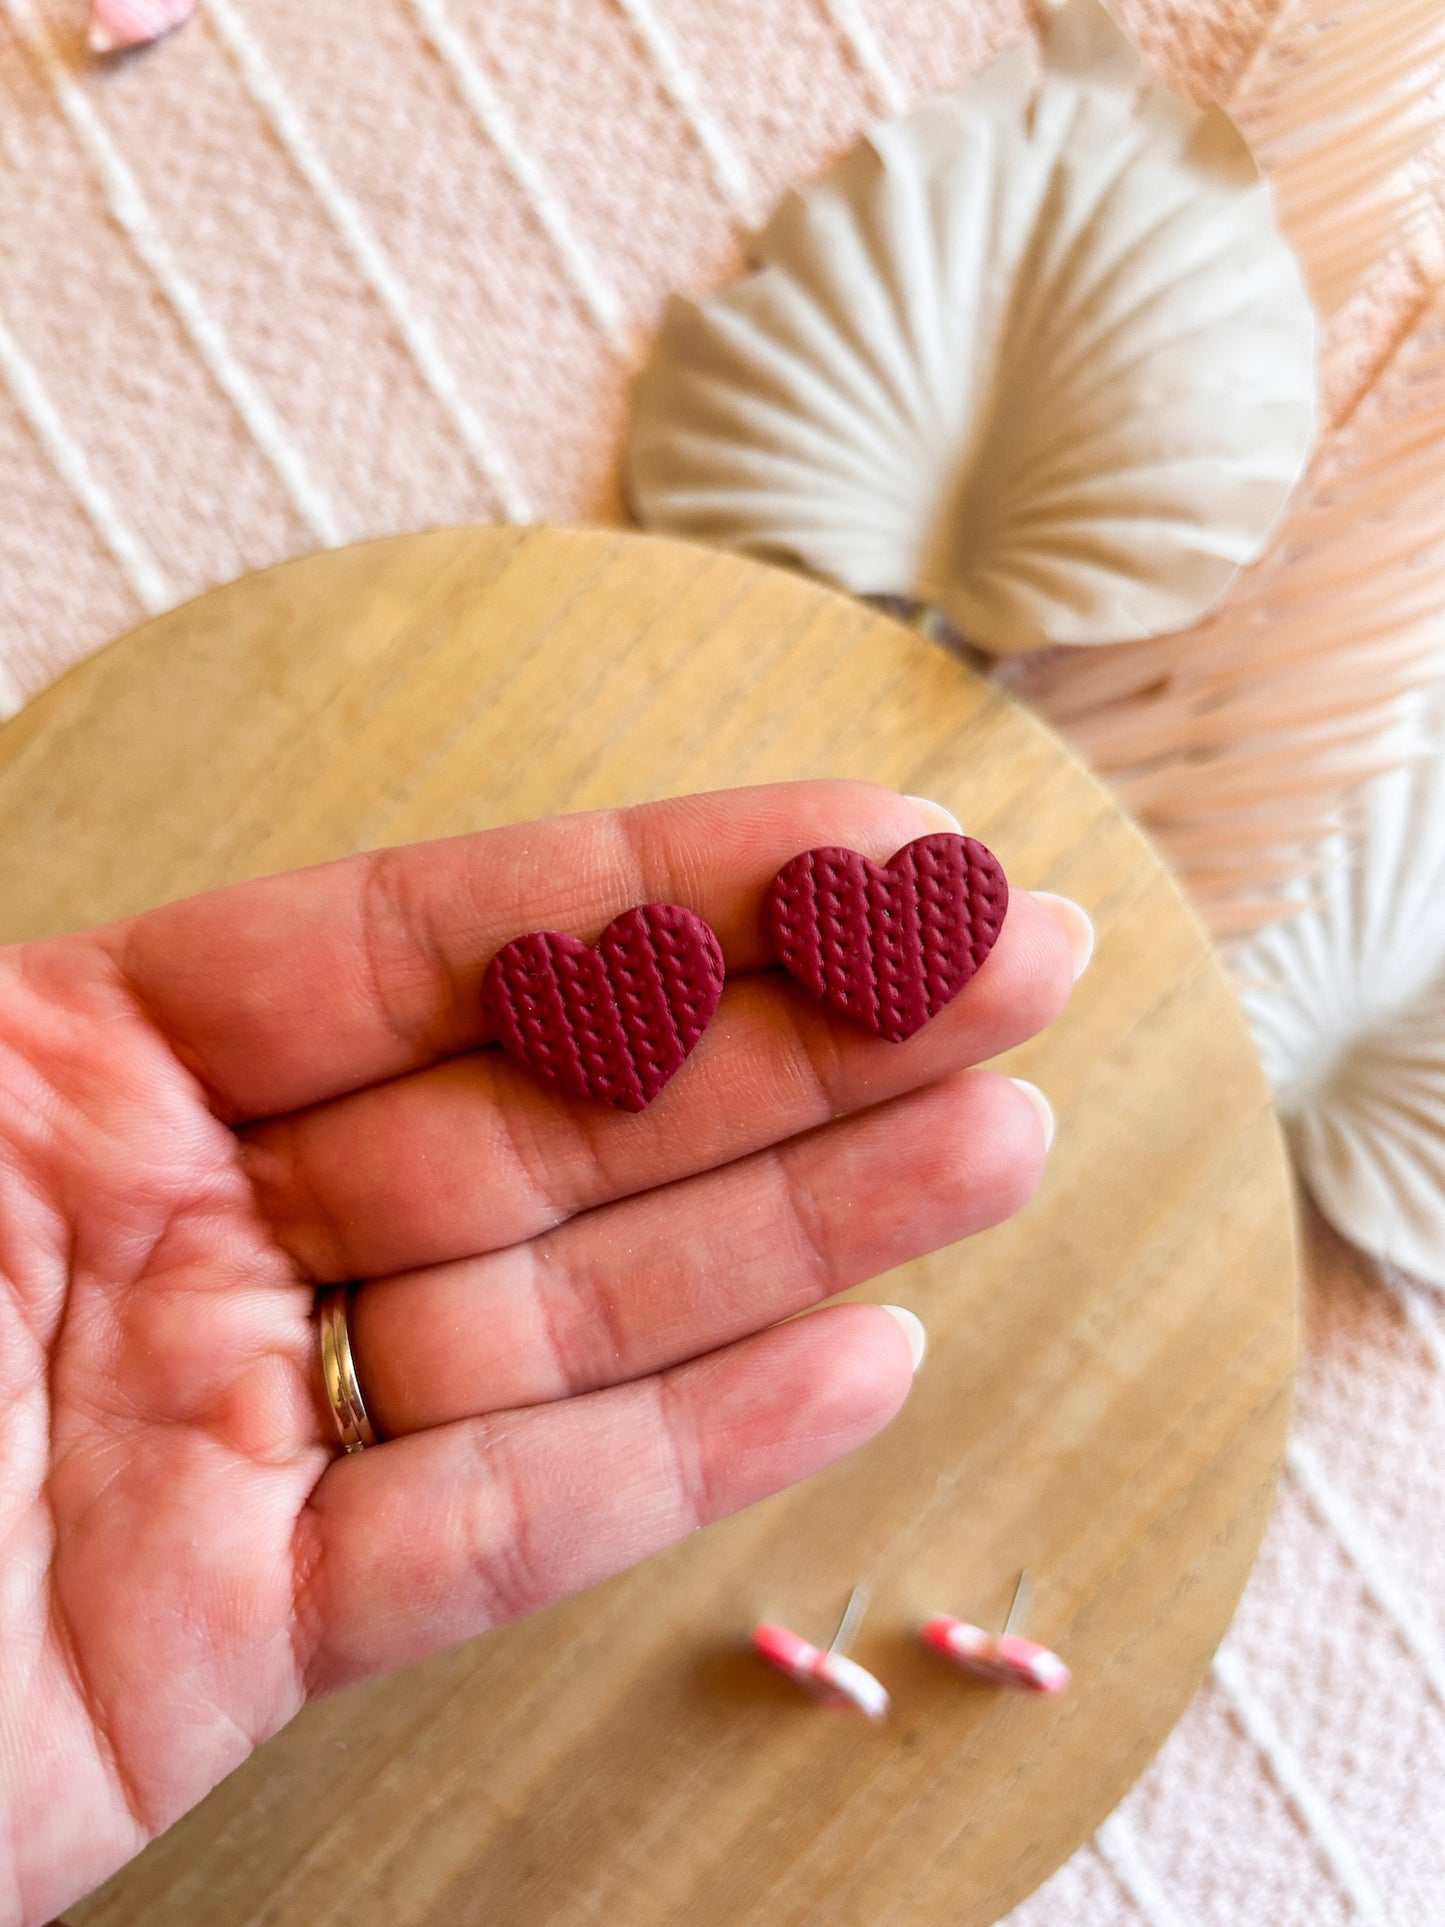 Steal My Heart Valentines Day Studs | Heart Earrings | Galentine's Day Earrings | Stud Earrings | Lightweight